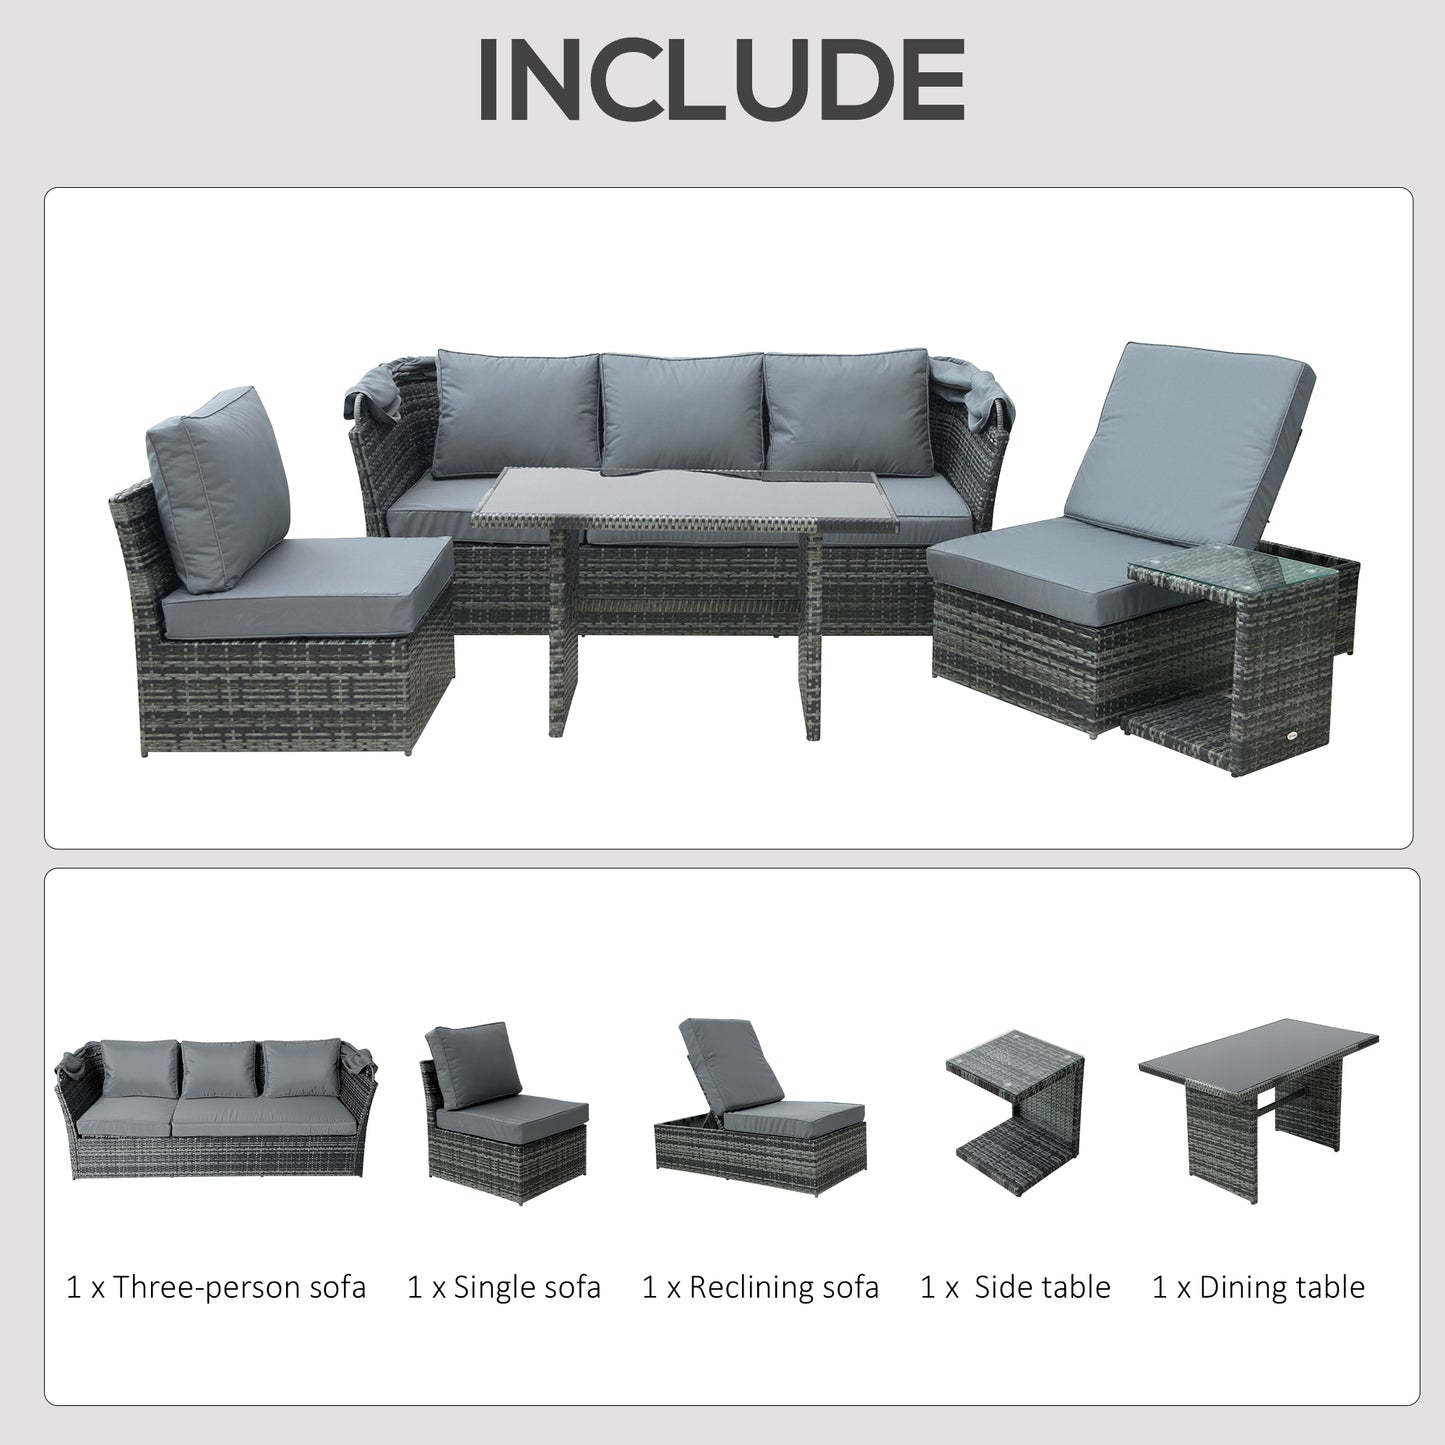 Outsunny Rattan Garden Sofa Set, 5-Seater Outdoor Furniture with Reclining Sofa, Adjustable Canopy & Side Table, Mixed Grey